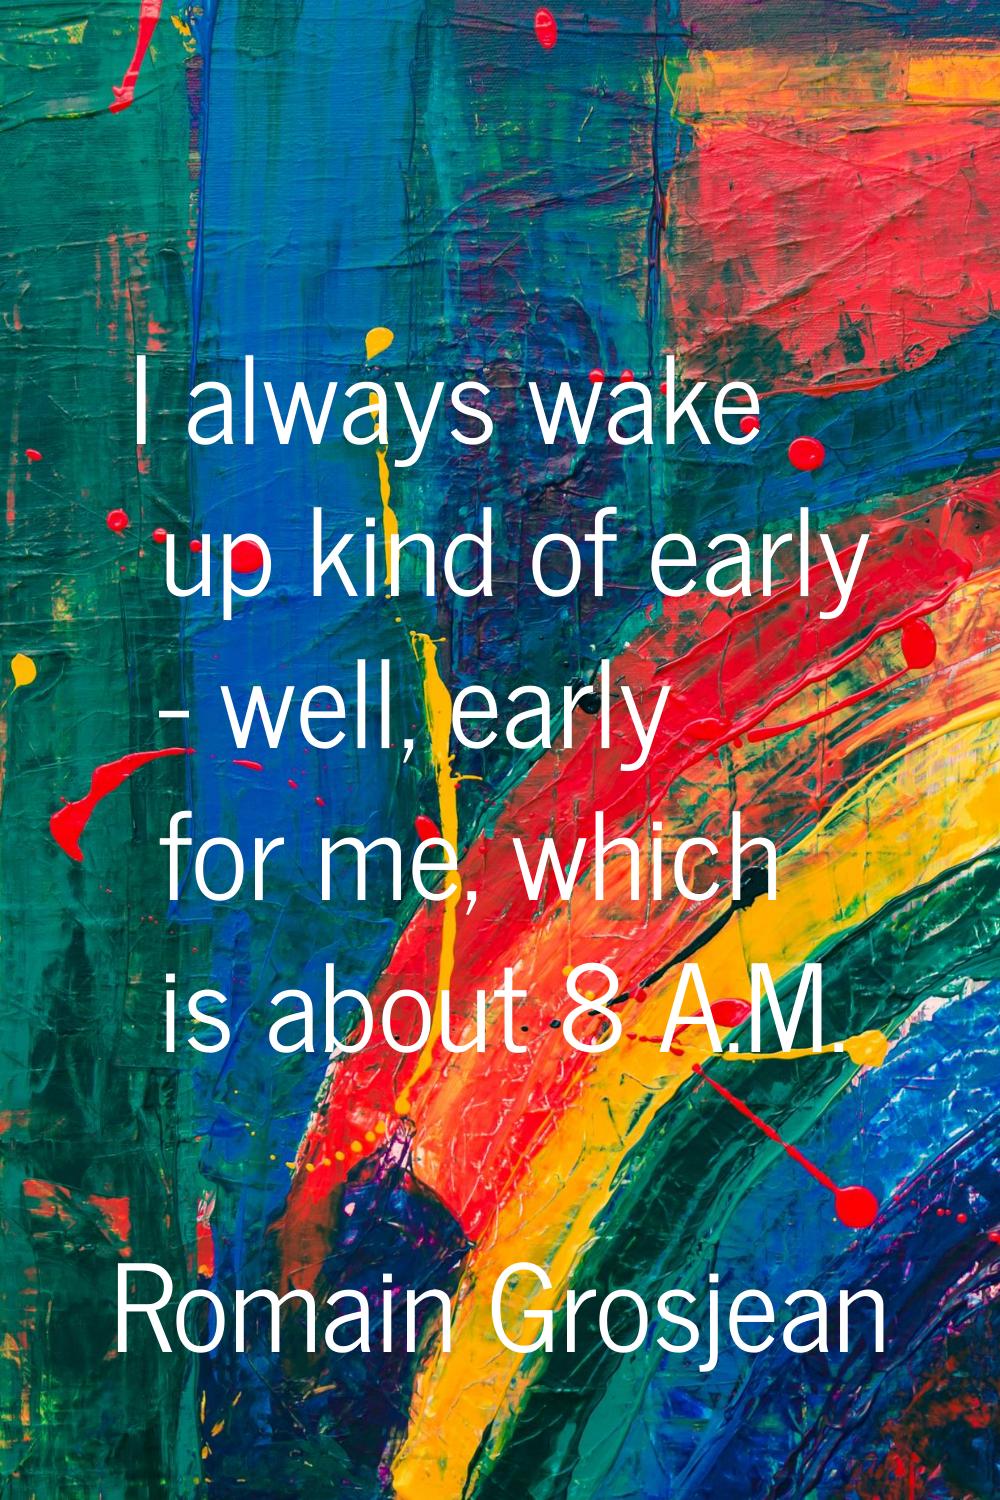 I always wake up kind of early - well, early for me, which is about 8 A.M.